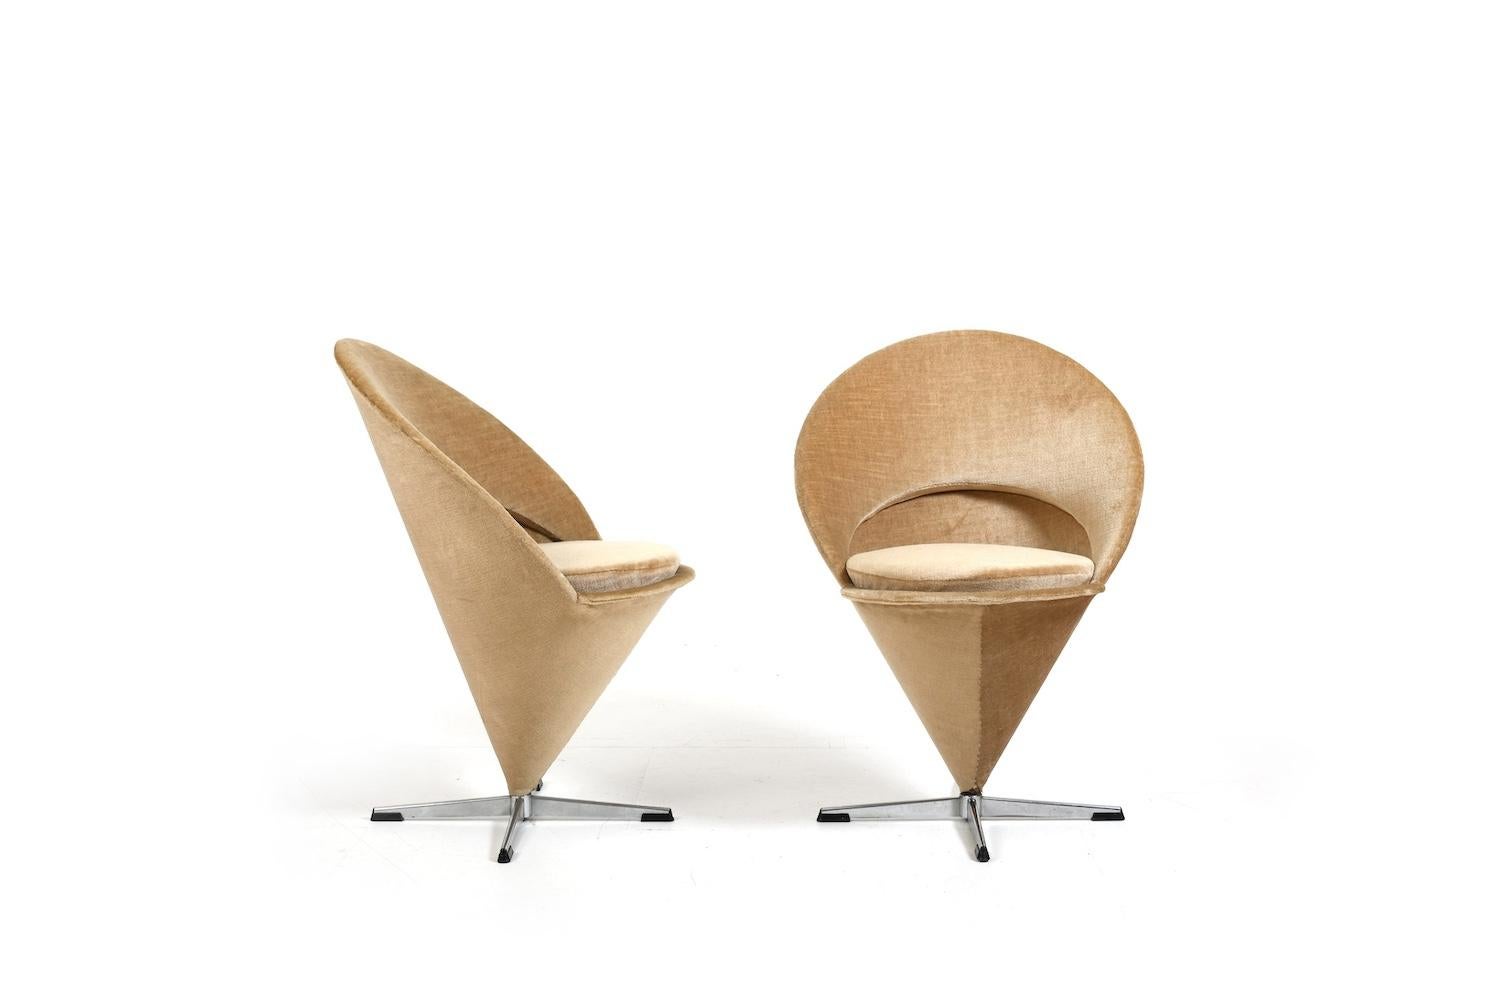 Pair of Cone chairs by Verner Panton for Pluslinje Denmark. Original upholstered with velour fabric. Denmark 1970s. In very good vintage condition. 